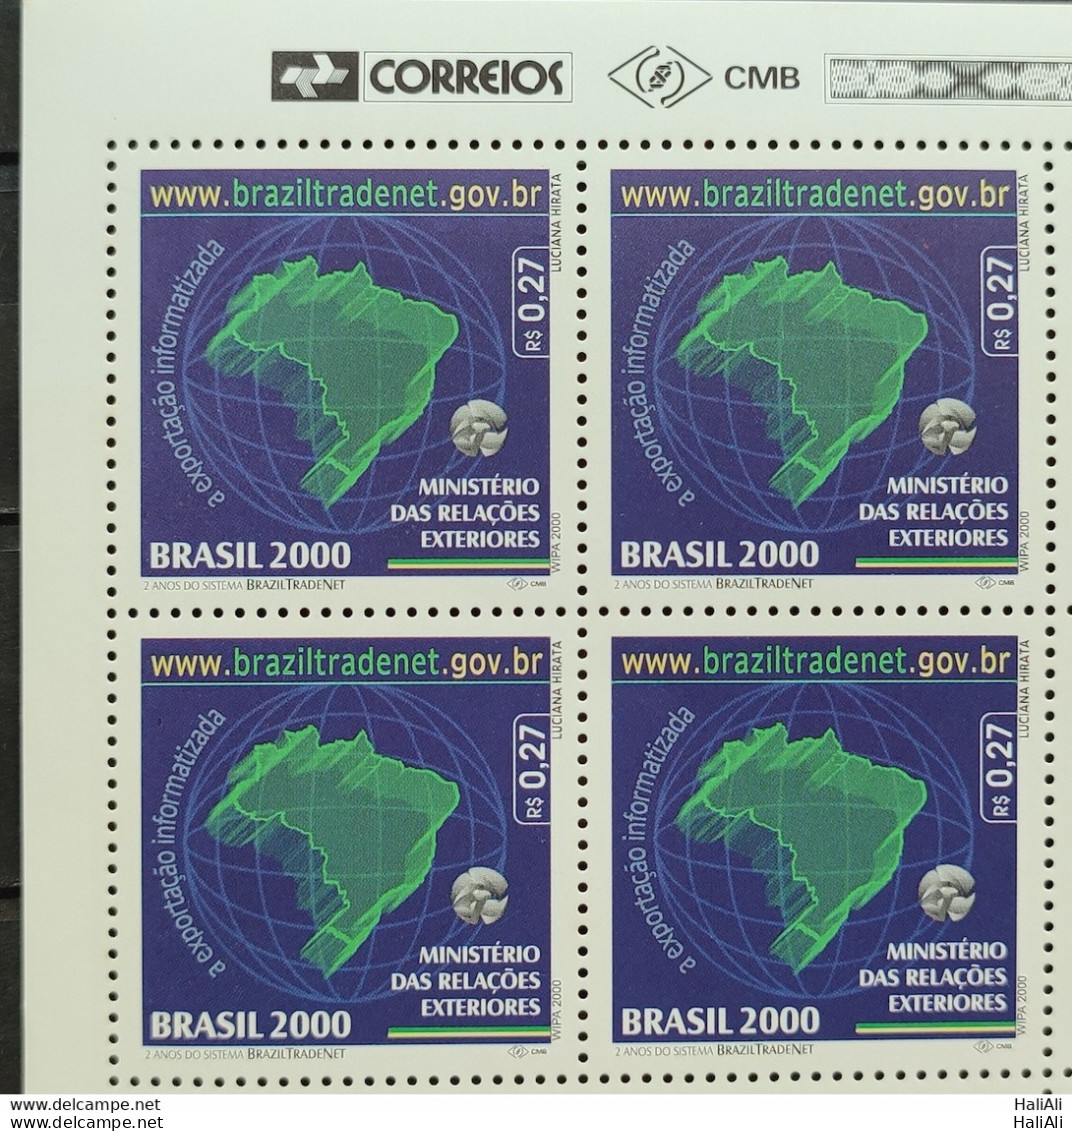 C 2275 Brazil Stamp Ministry Of Foreign Affairs Map Braziltradenet 2000 Block Of 4 Vignette Correios - Unused Stamps